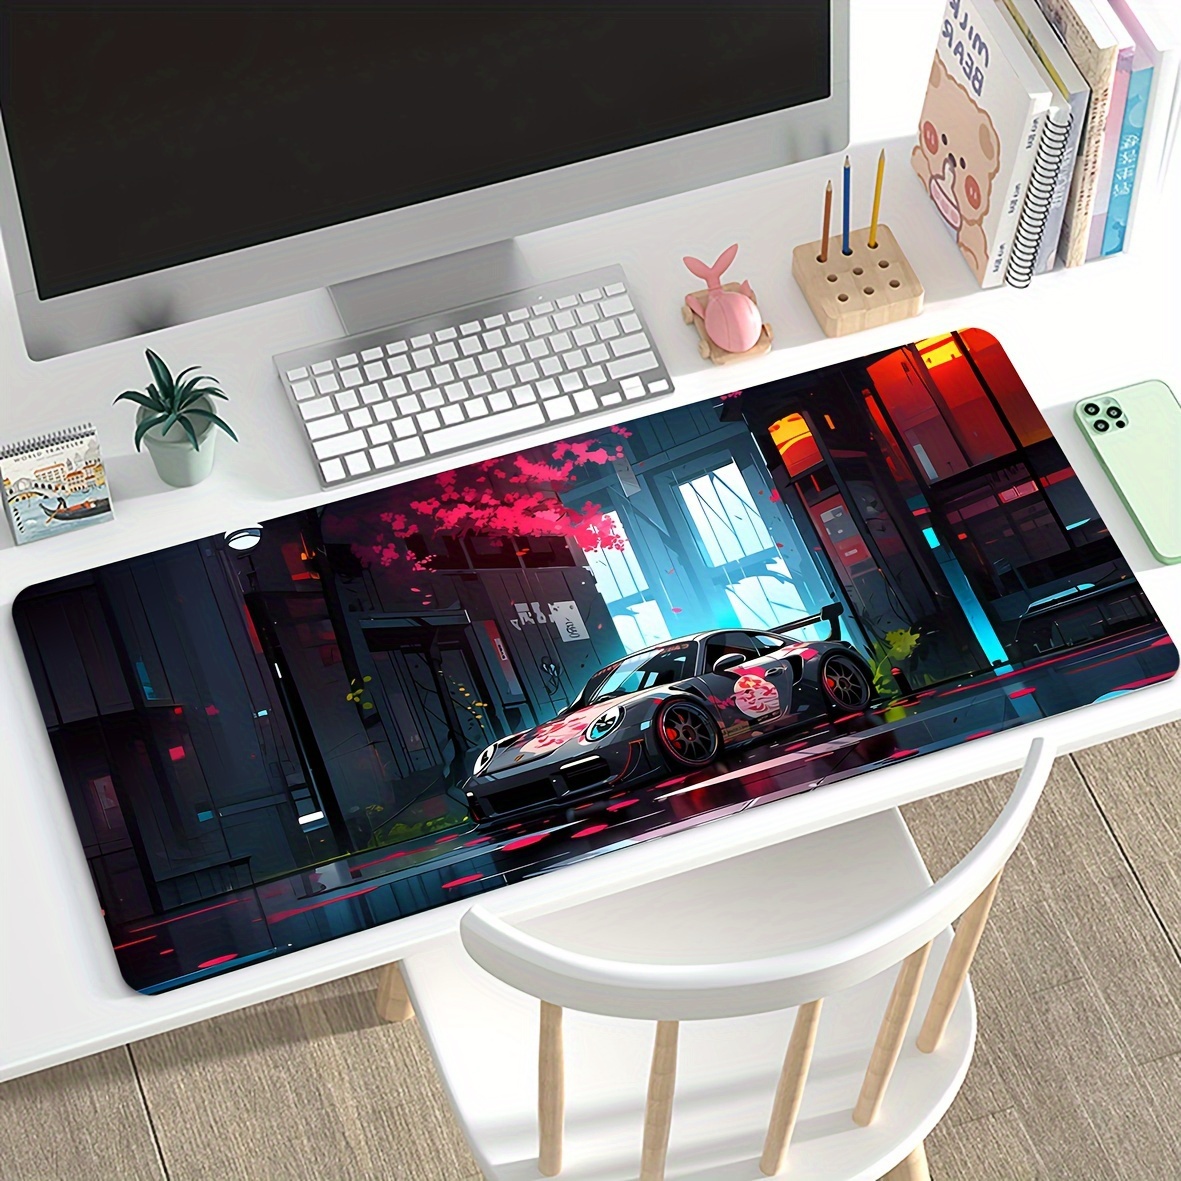 

A Mouse Pad With A Drawing Of A Racing Car For Anime Games, An Anti-slip Desk Pad, And A .